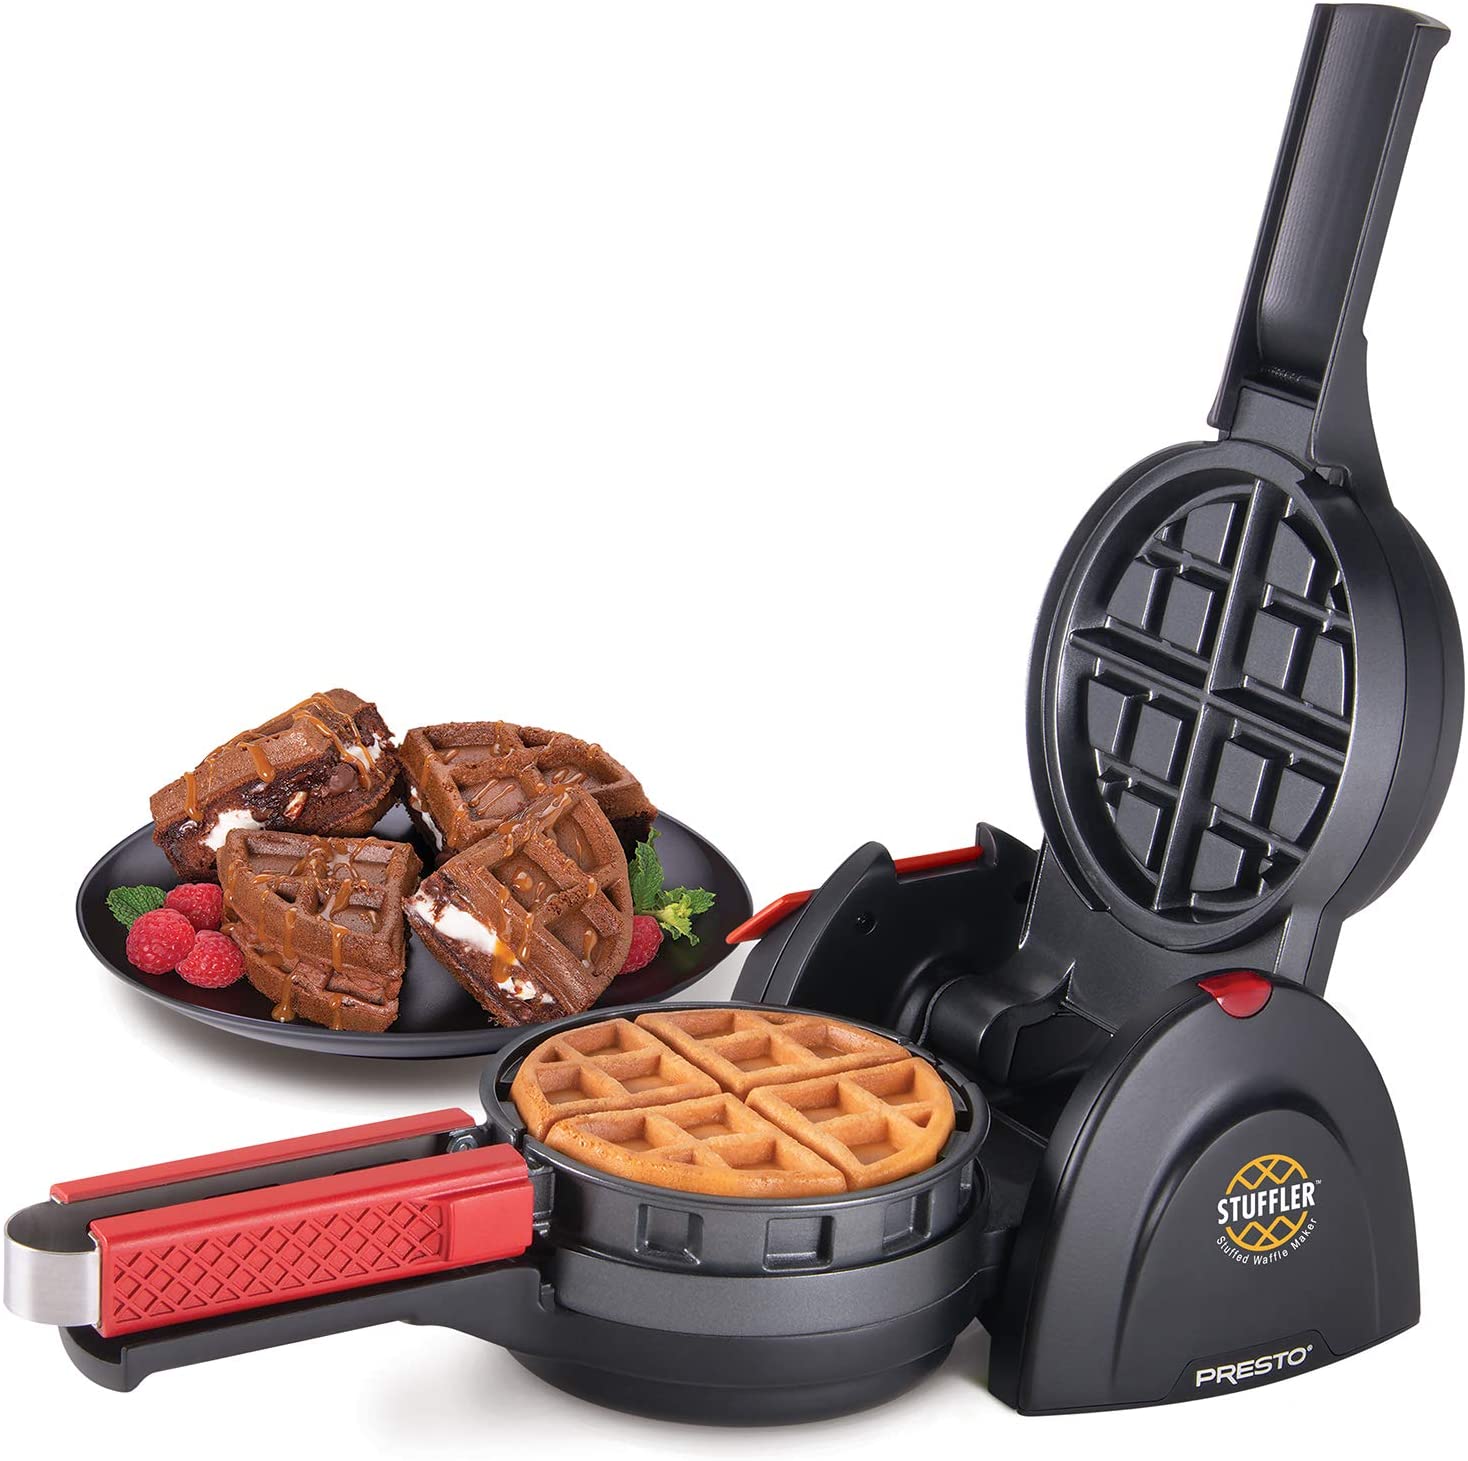 2020 Best Belgian Waffle Makers Reviews And Buying Guide